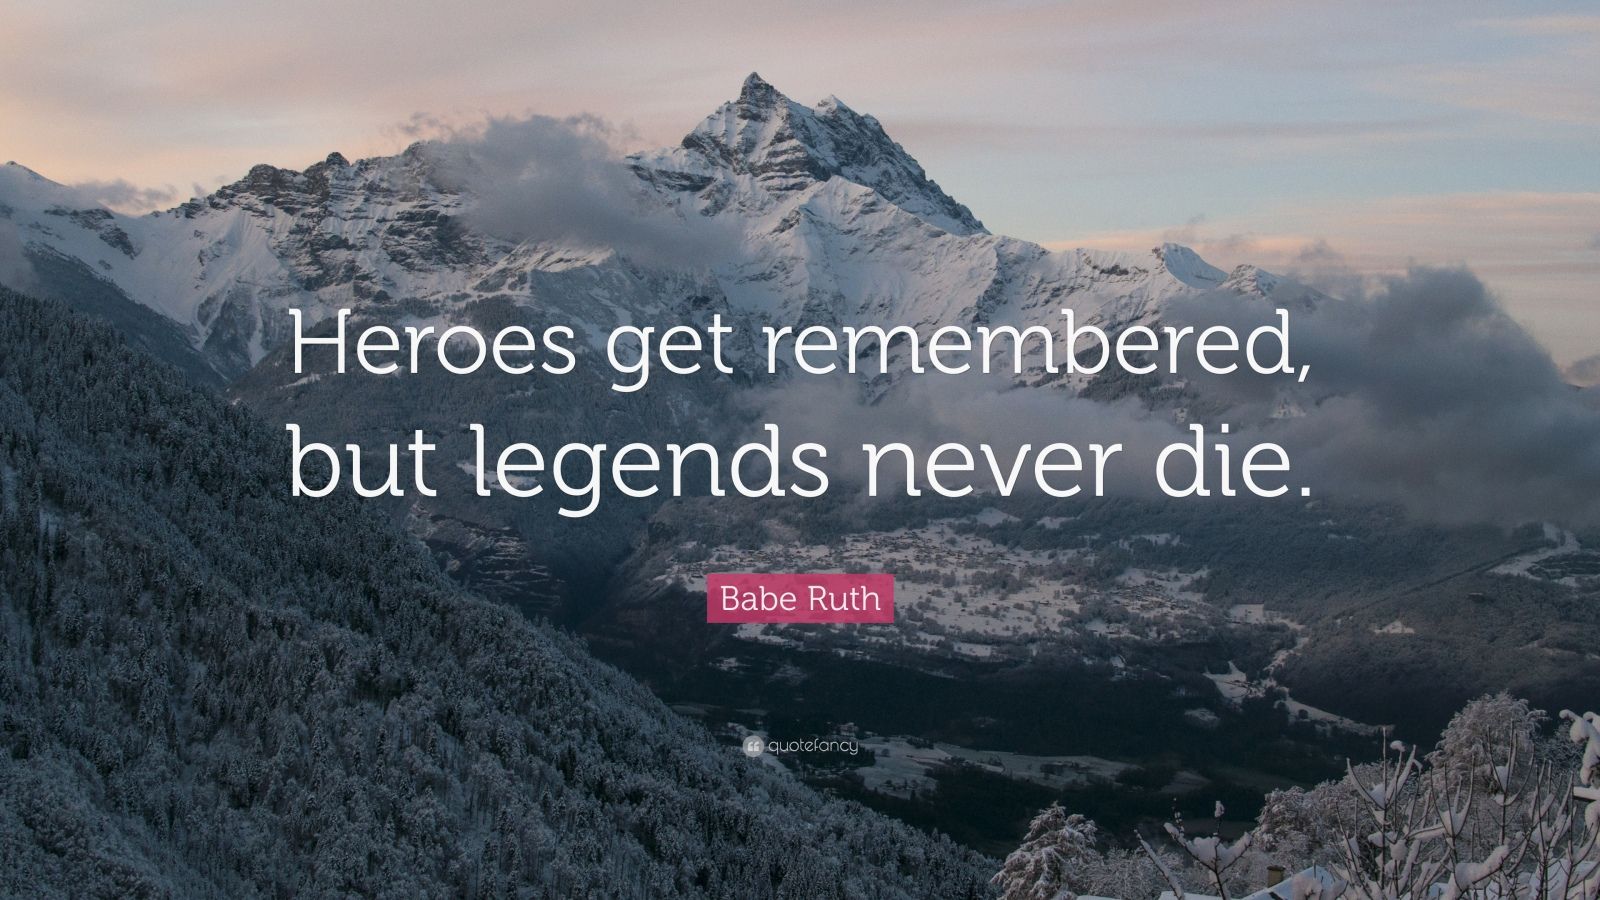 Babe Ruth Quote: “Heroes get remembered, but legends never ...